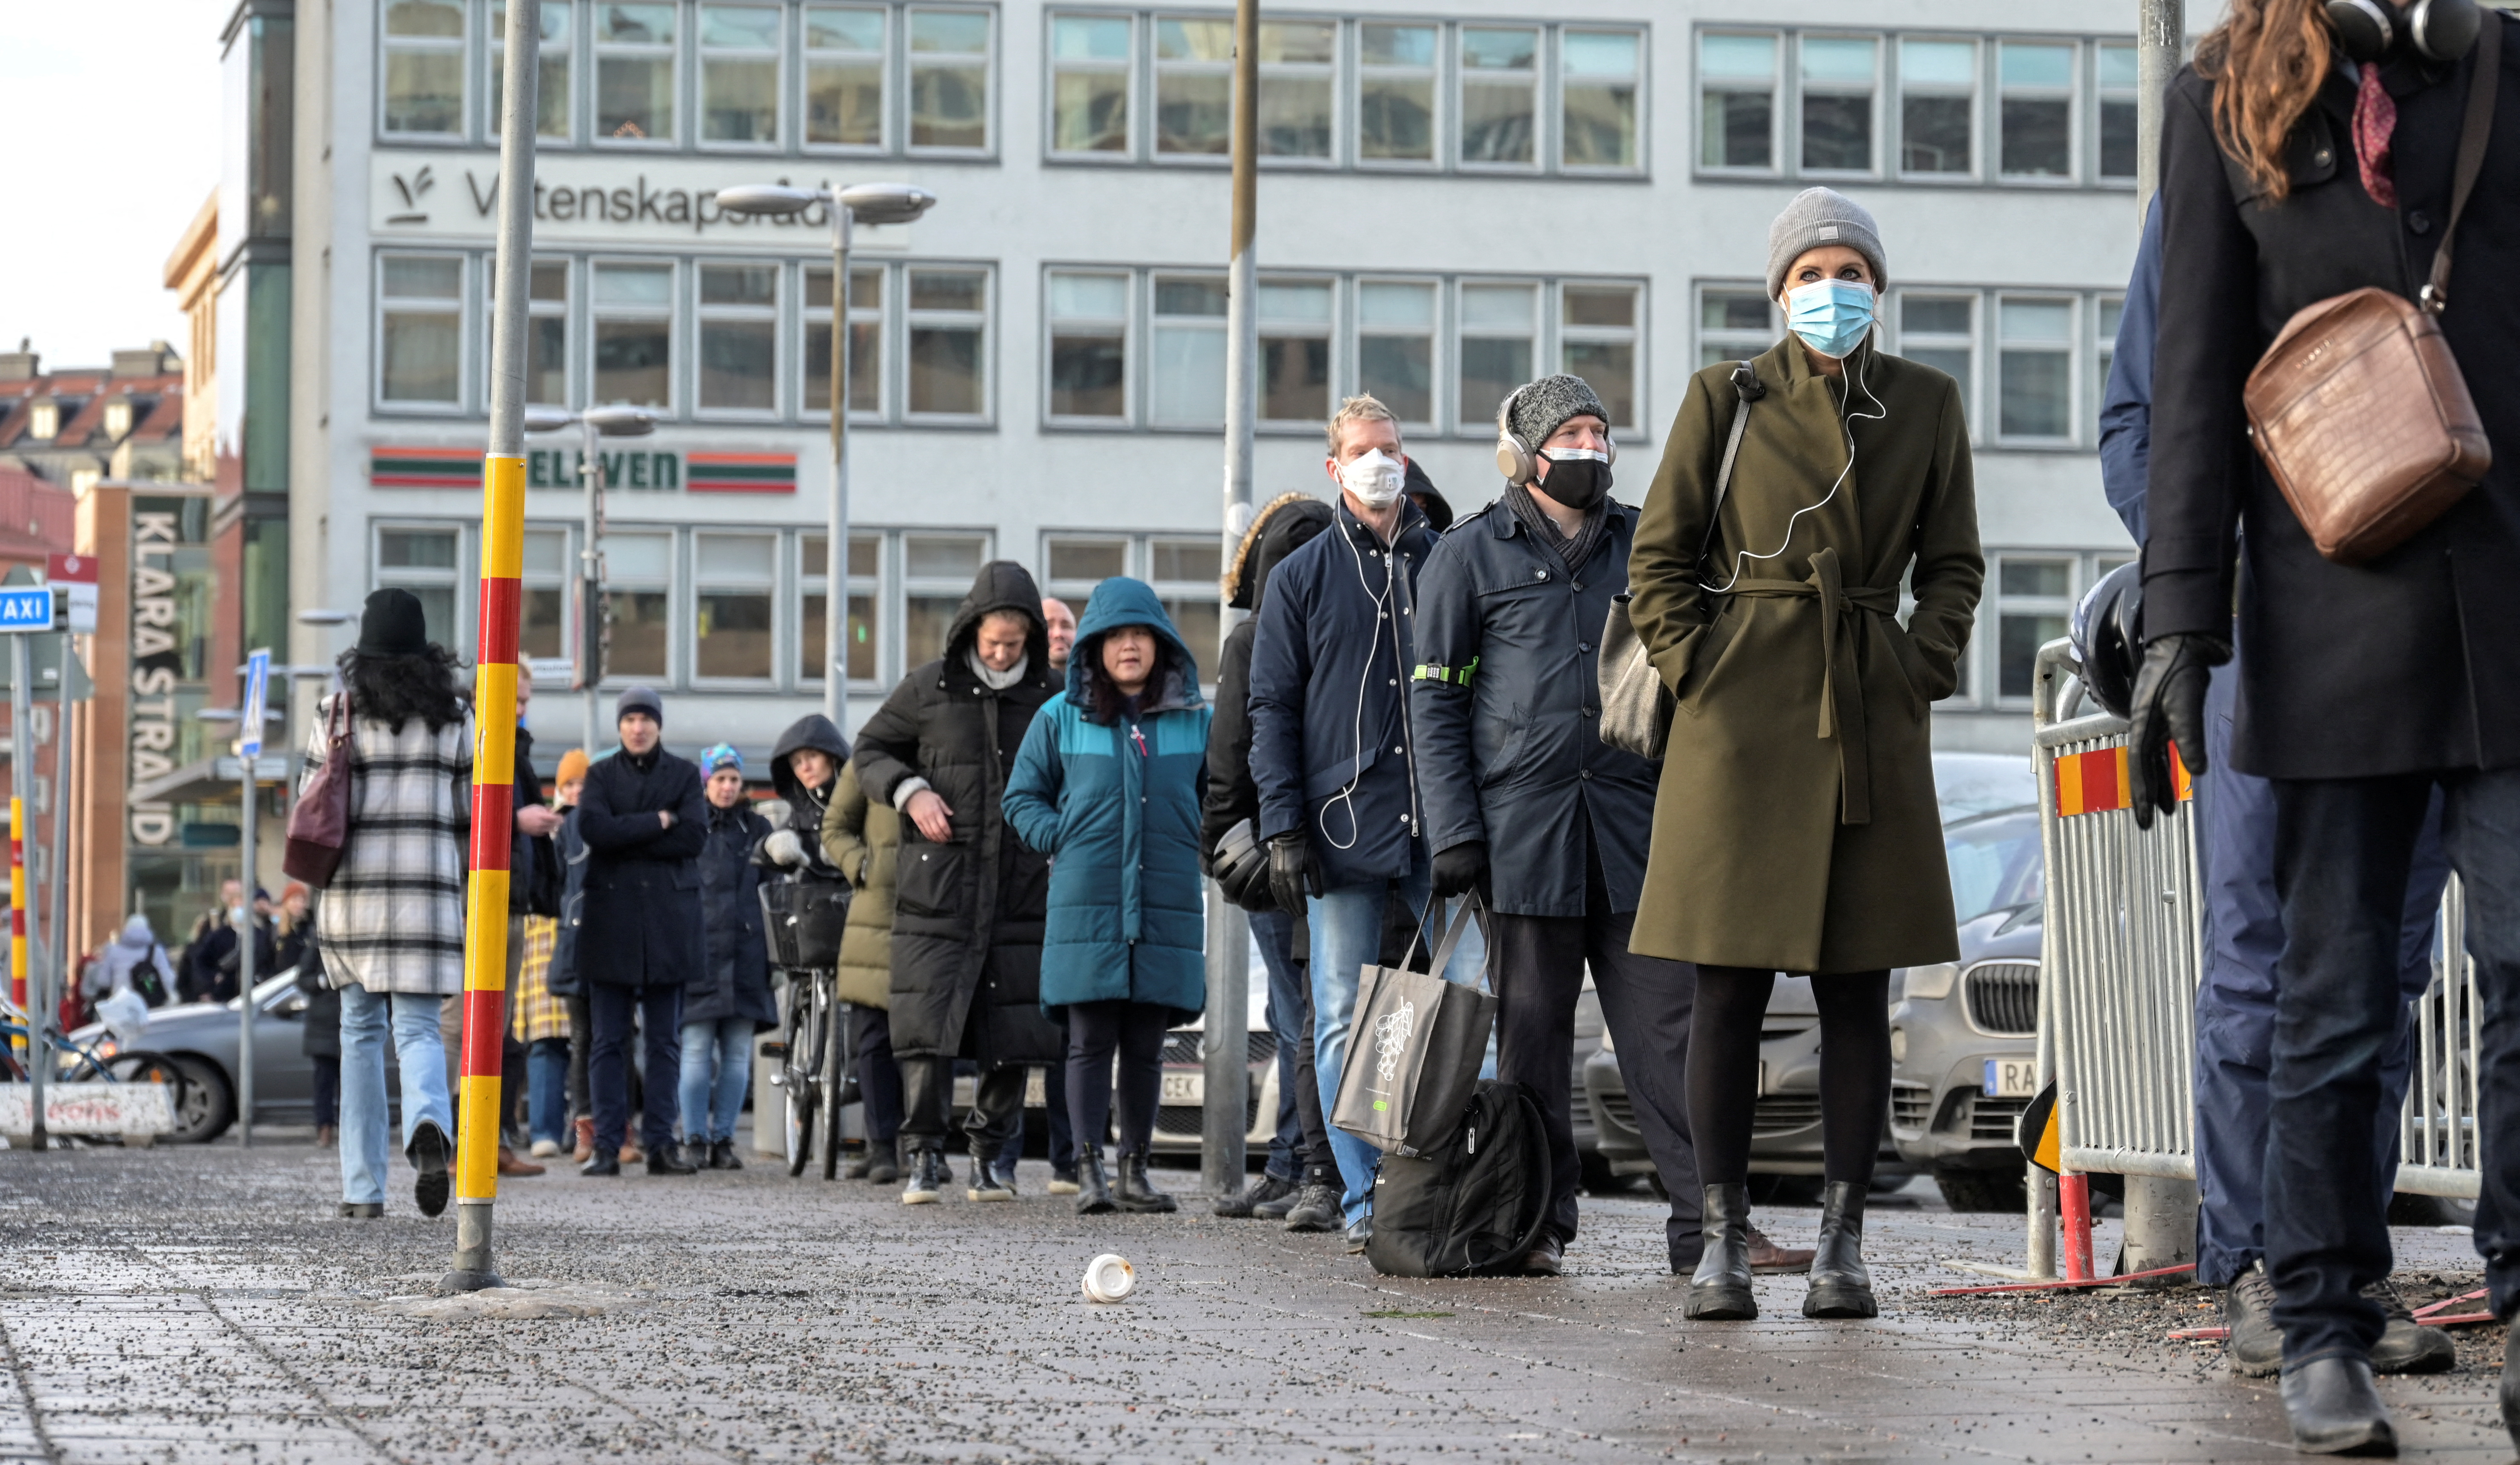 People queue for a drop-in vaccination at Stockholm City Terminal station